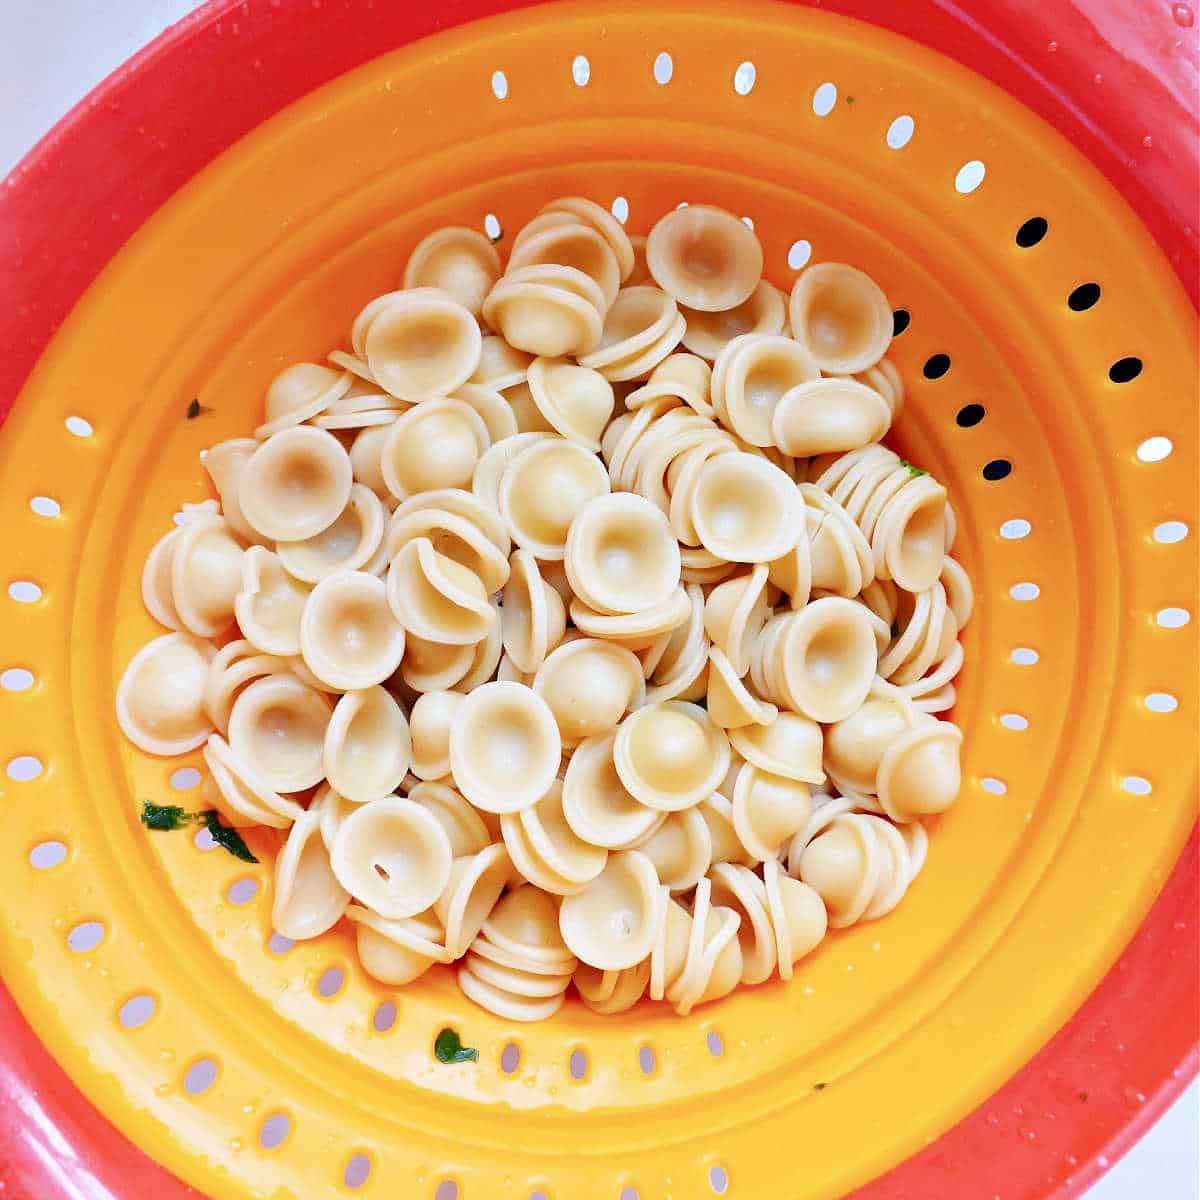 orecchiette being drained after being cooked in a colander in a sink